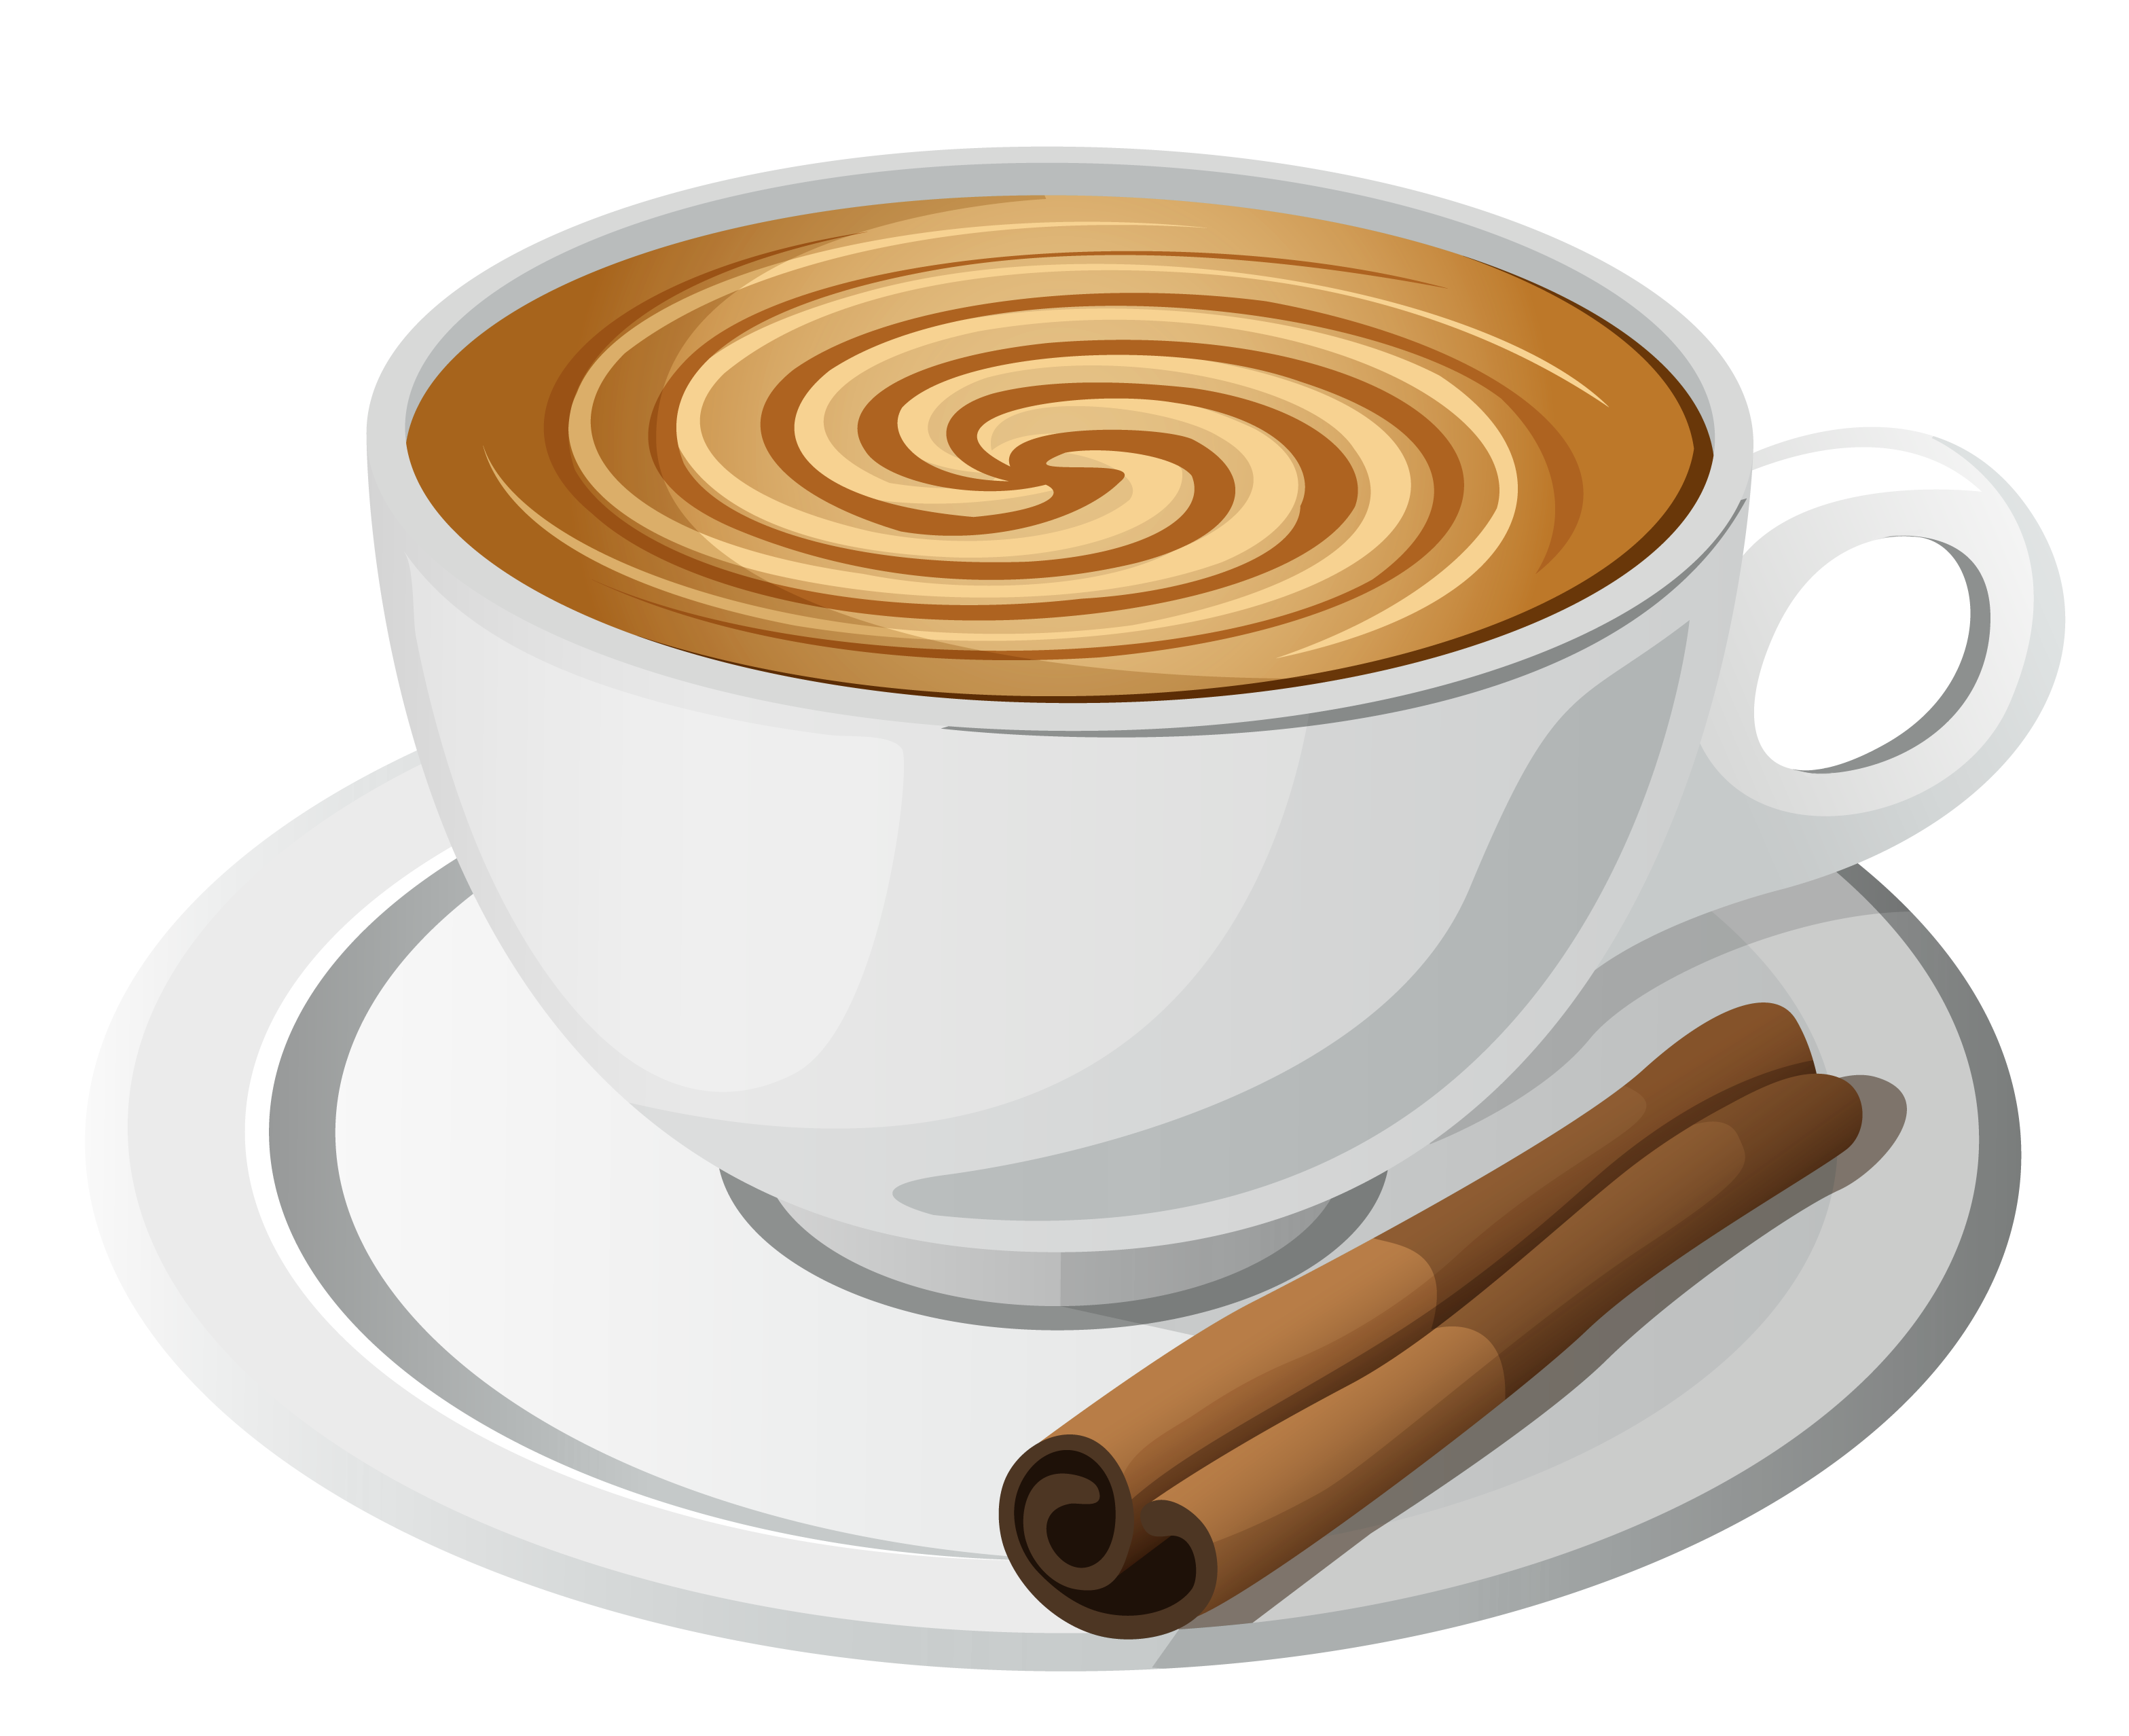 Juice clipart coffee. Cappuccino png images free